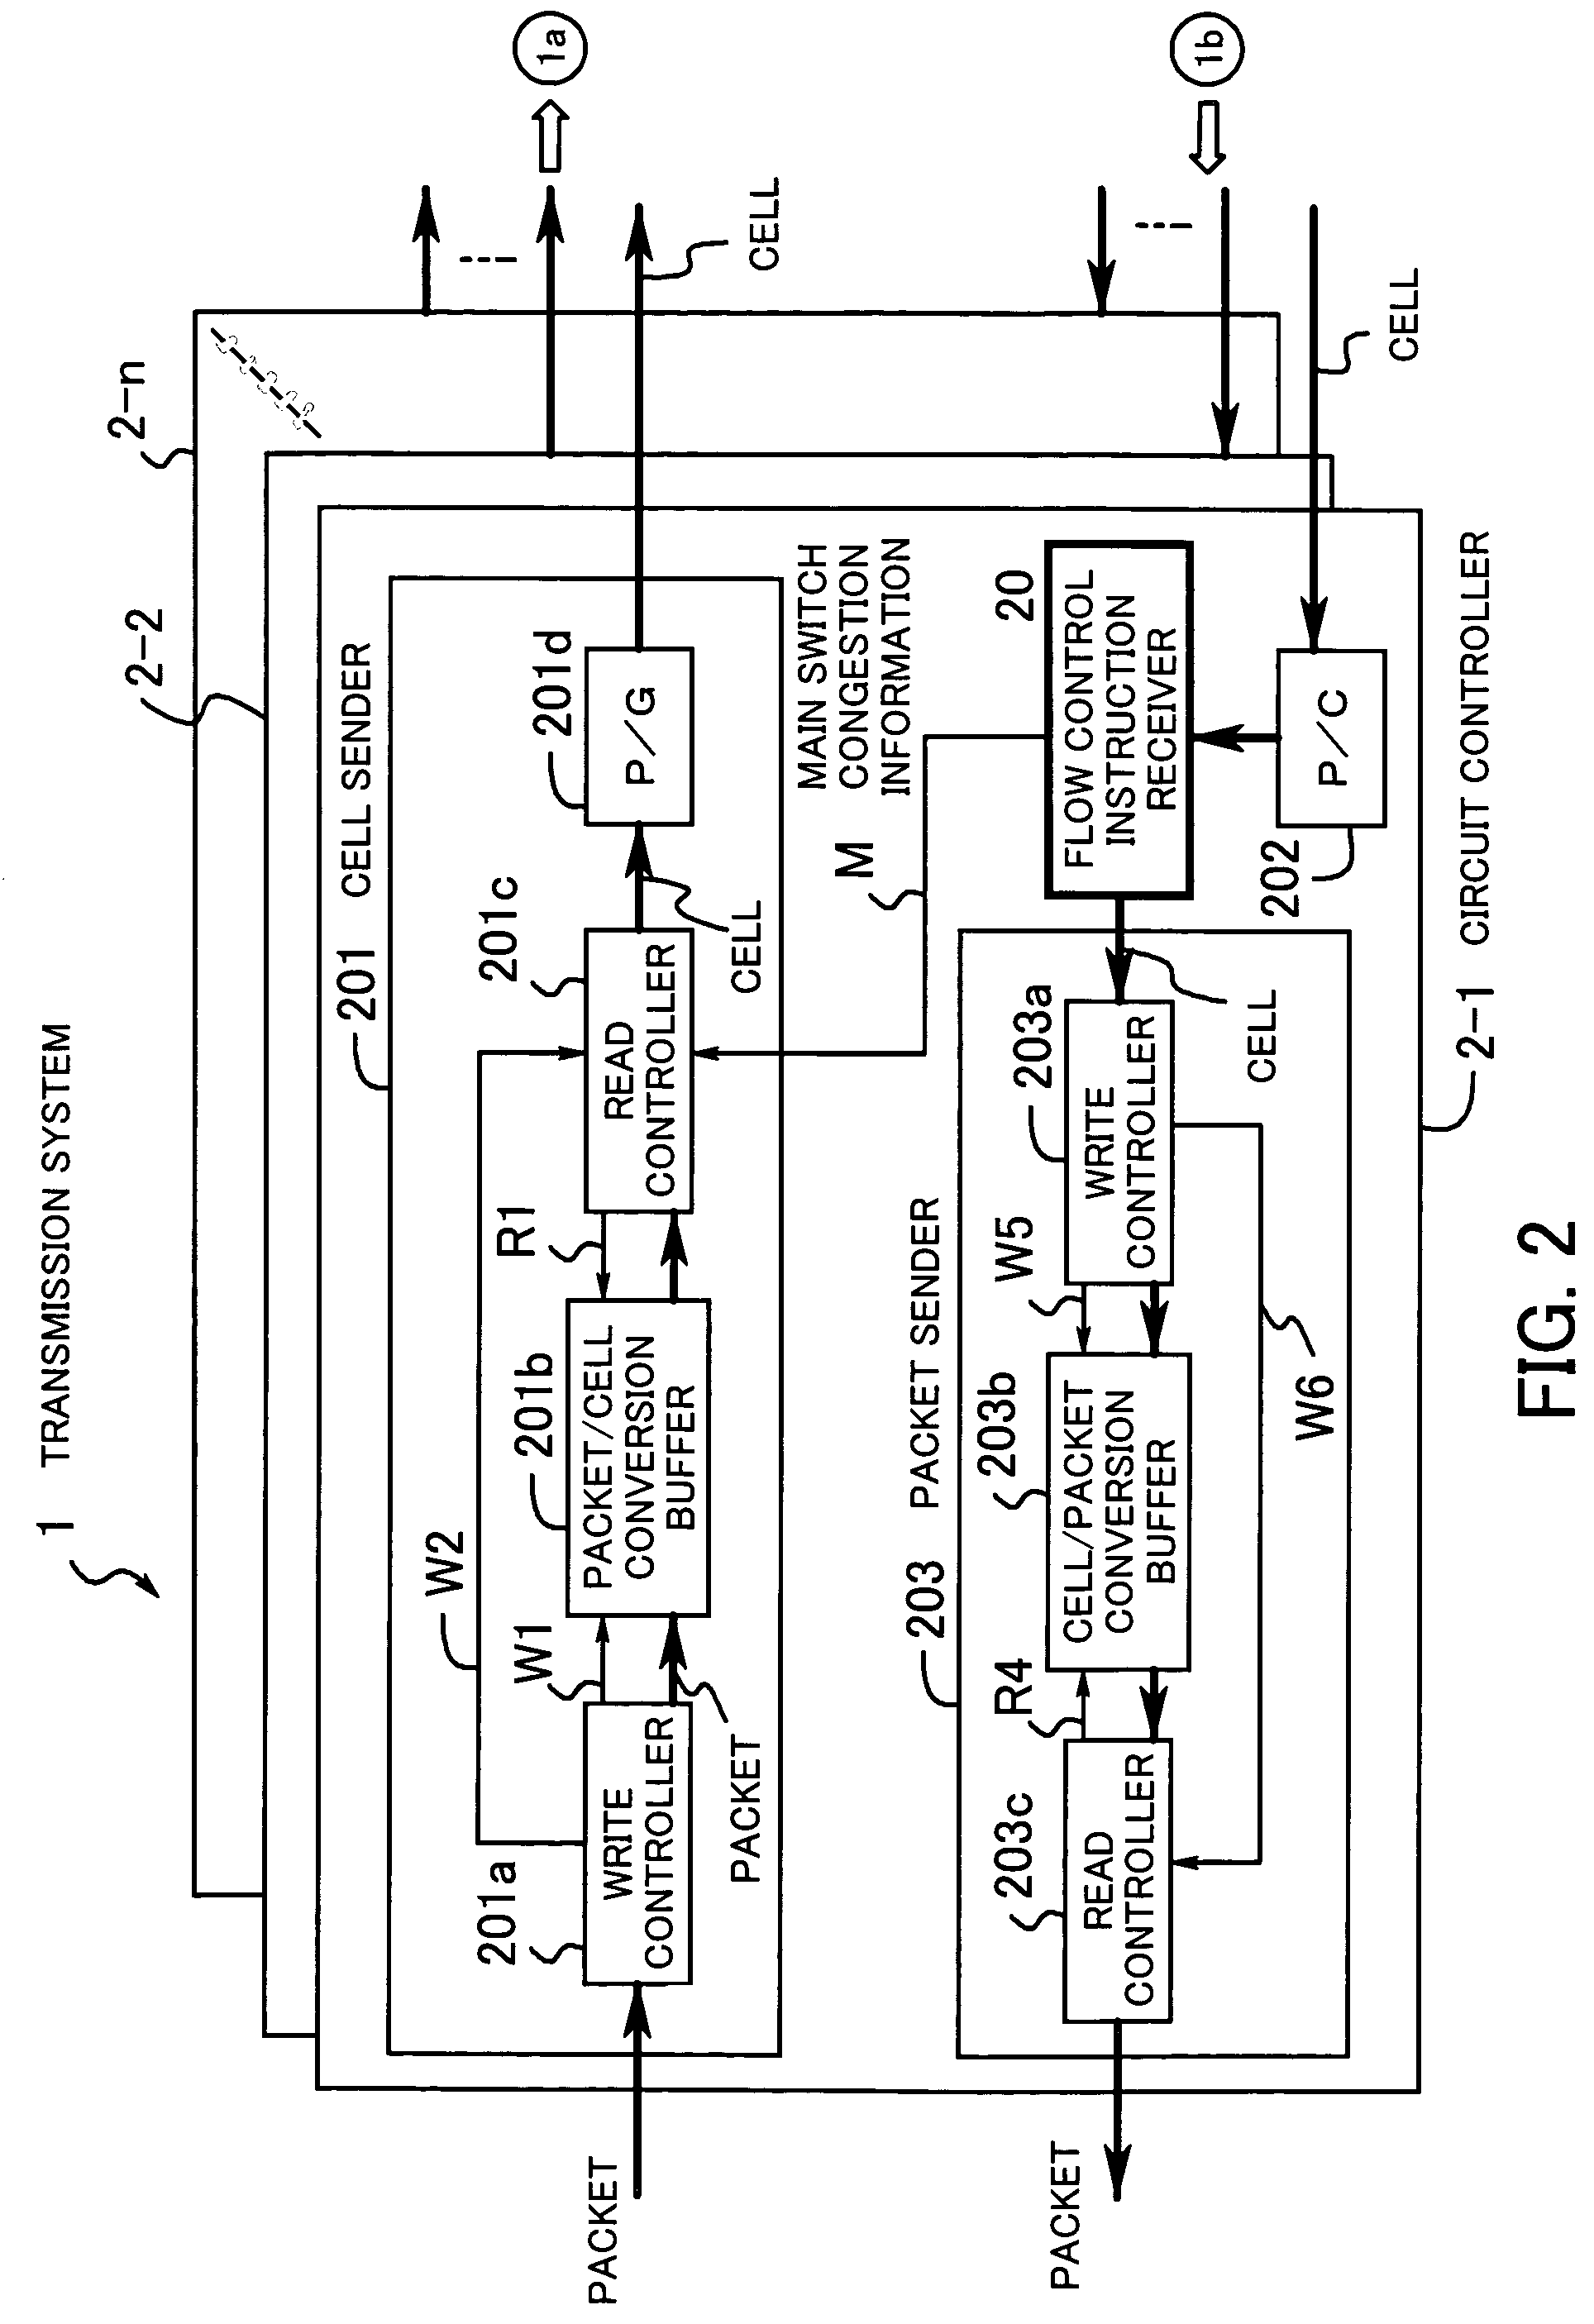 Transmission system with congestion state-based flow control